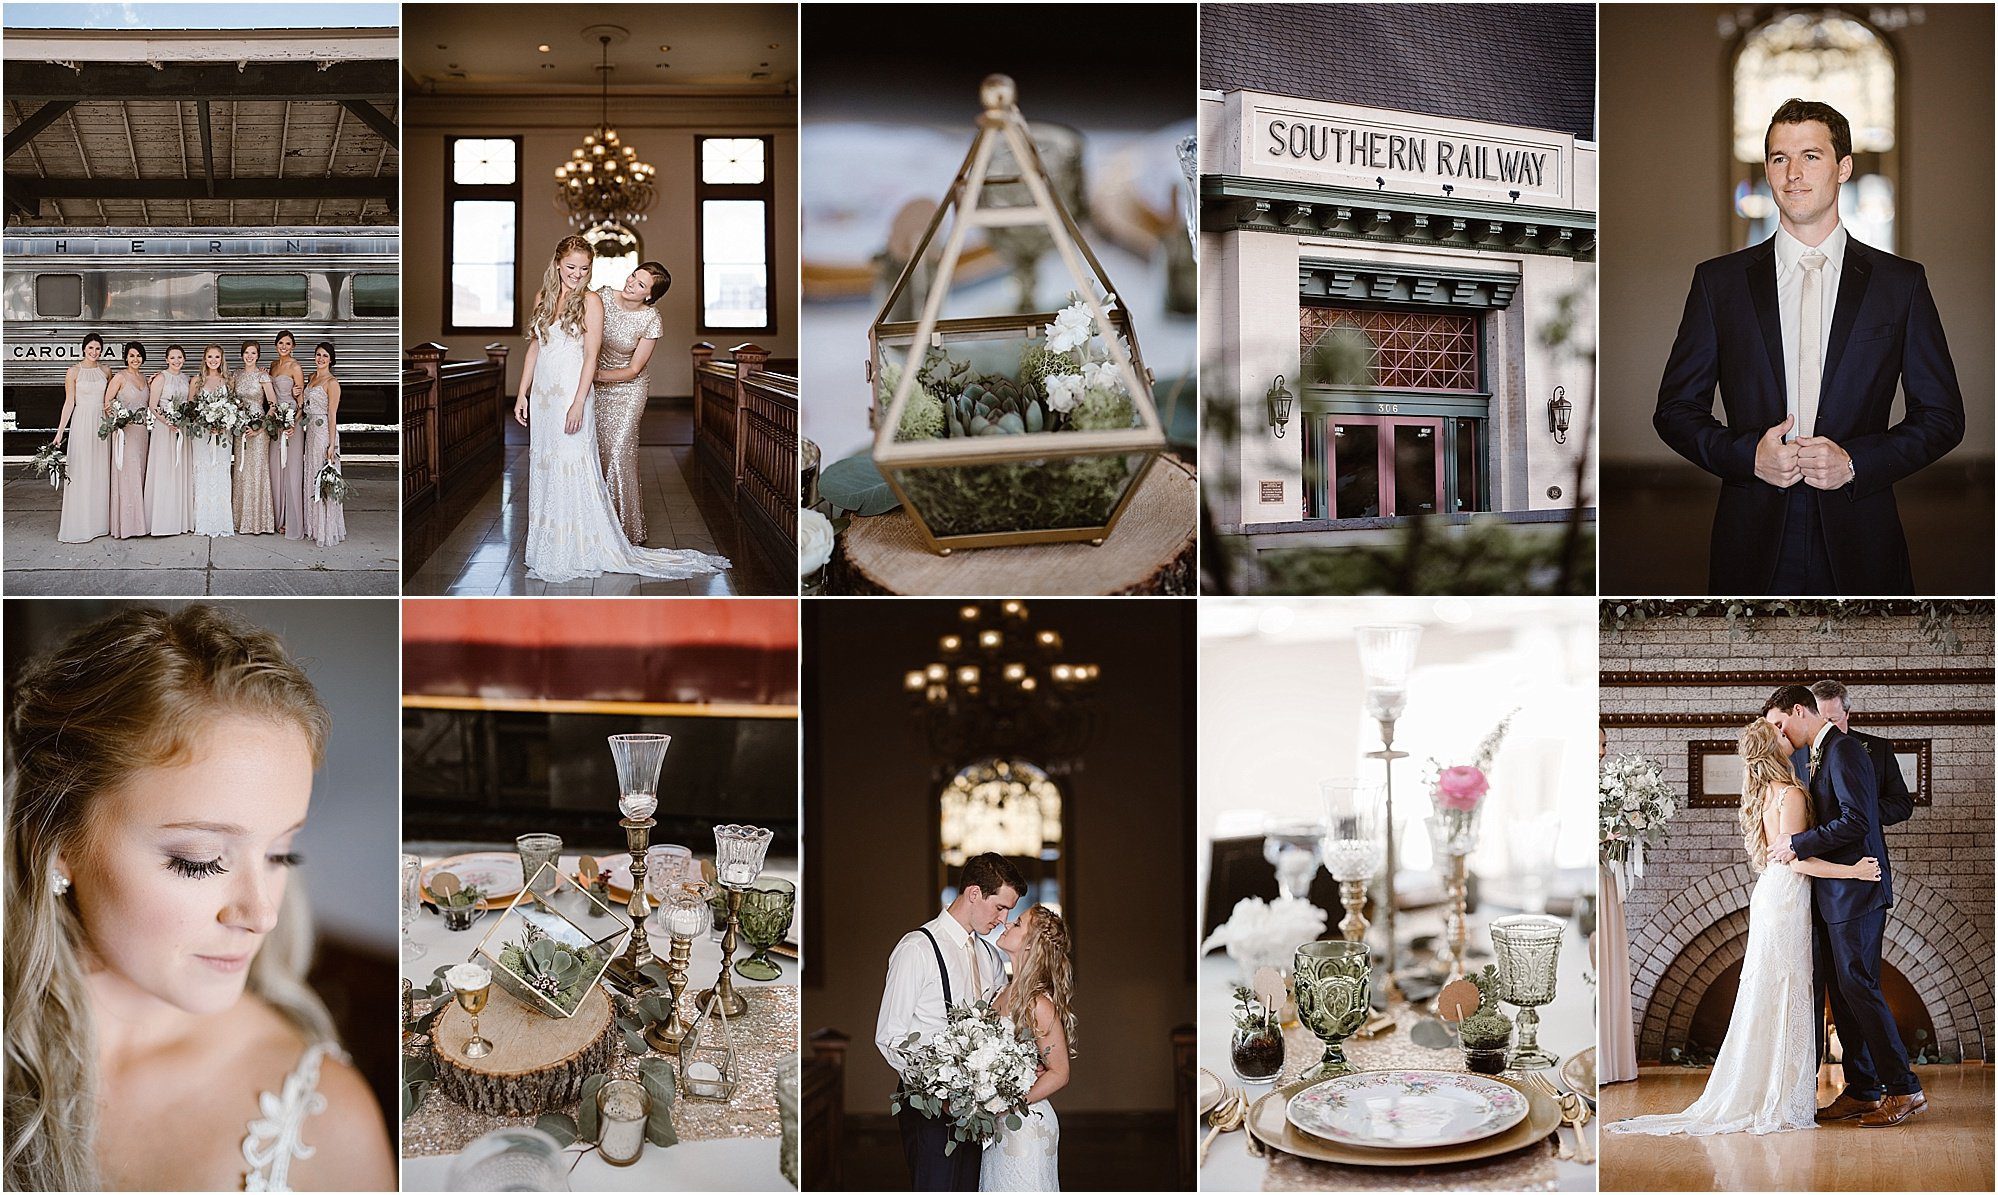 Vintage Inspiration Wedding at Southern Railway Station Knoxville